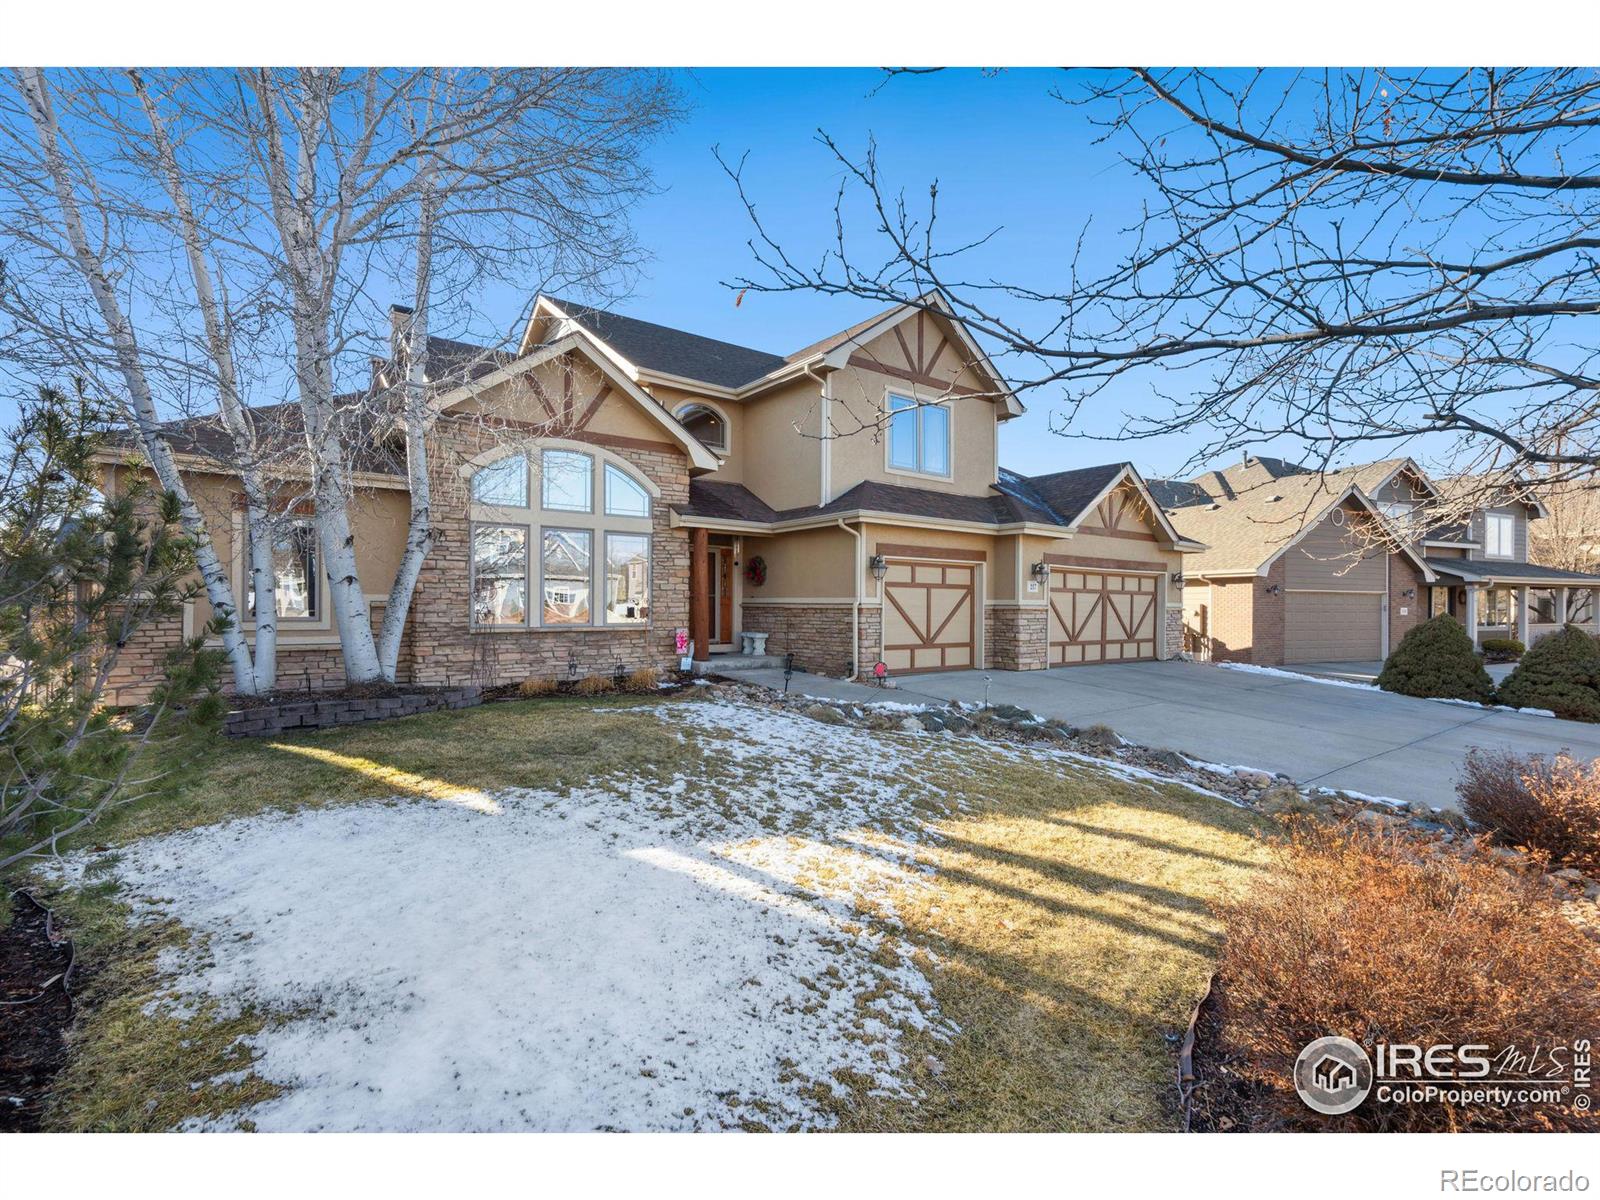 Report Image for 217 N 54th Avenue,Greeley, Colorado